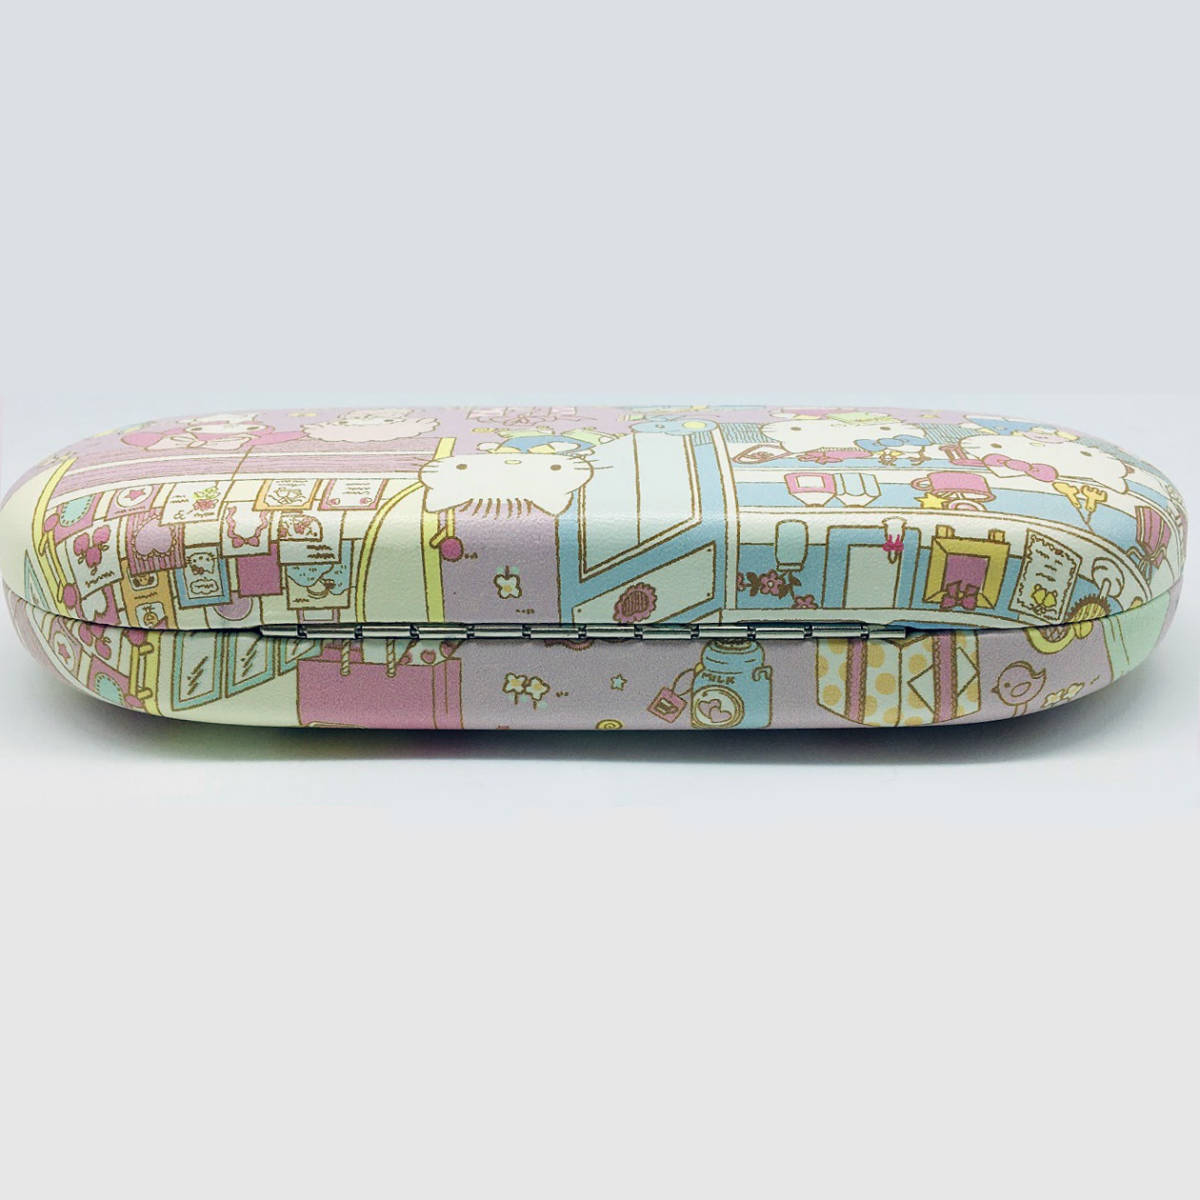  glasses case Sanrio Characters Sanrio * character z2016 Hello Kitty kiki.lala My Melody - Pom Pom Purin go in . woman 